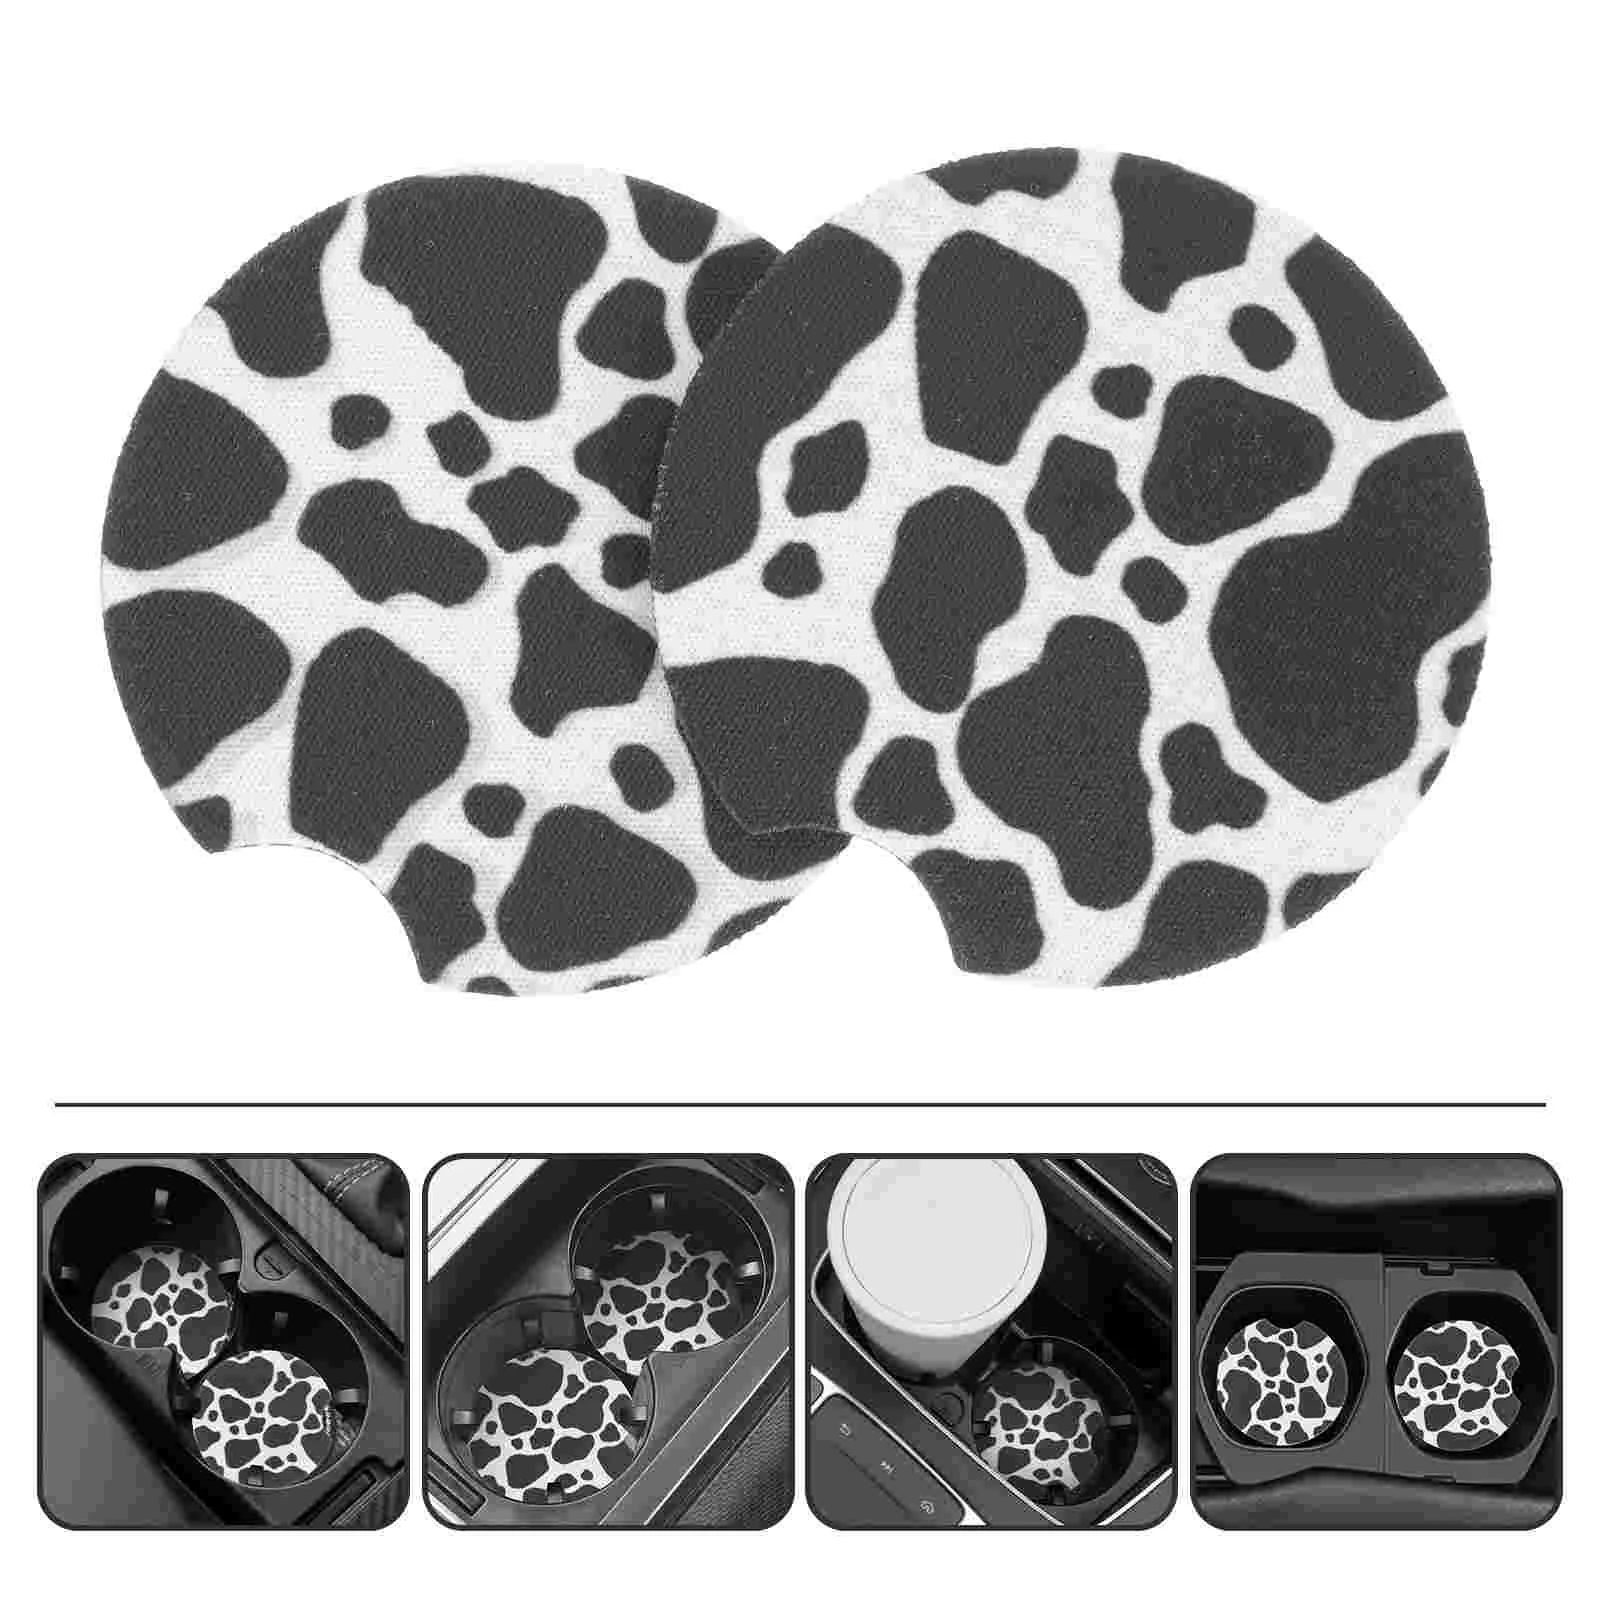 

4 Pcs Cow Pattern Coaster Car Coasters Cup Holders Accessories Coffee The Neoprene Print Drink